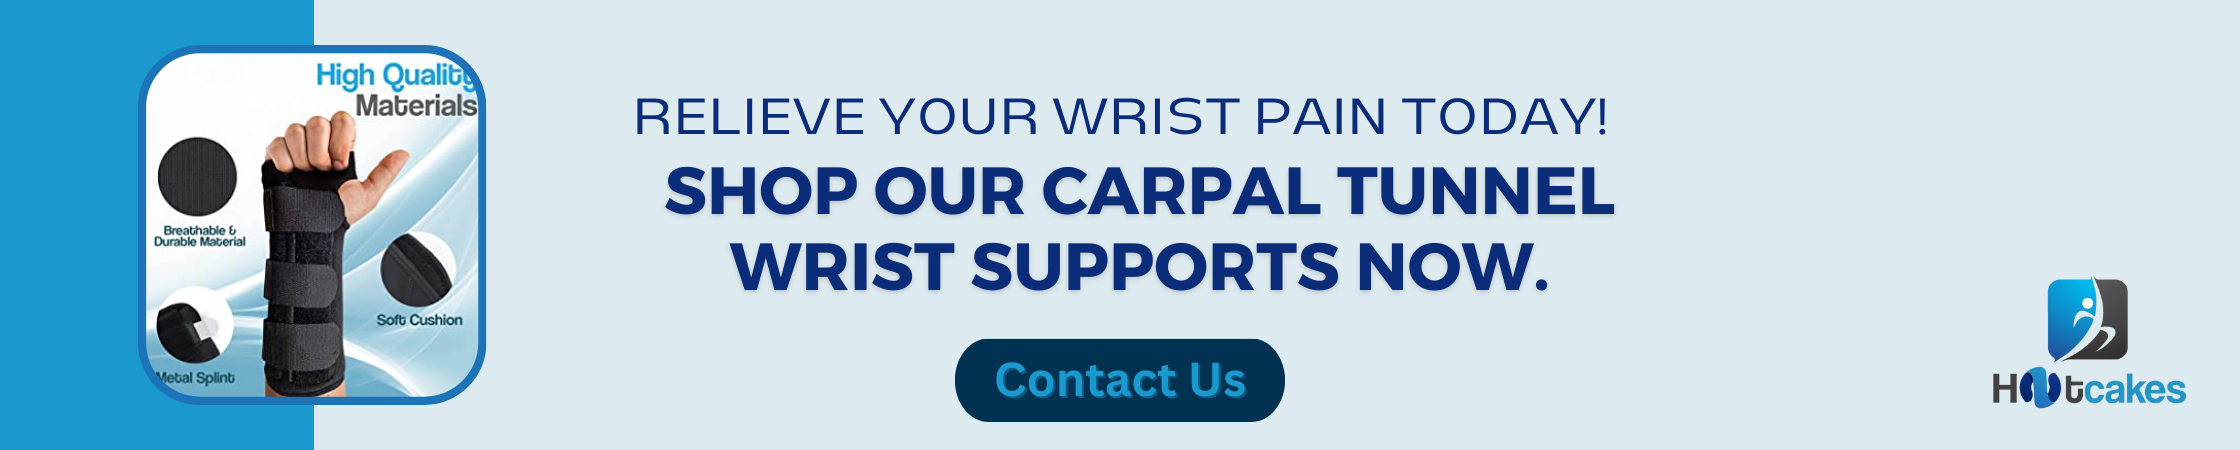 Wrist Support for Carpal Tunnel - Hot Cakes